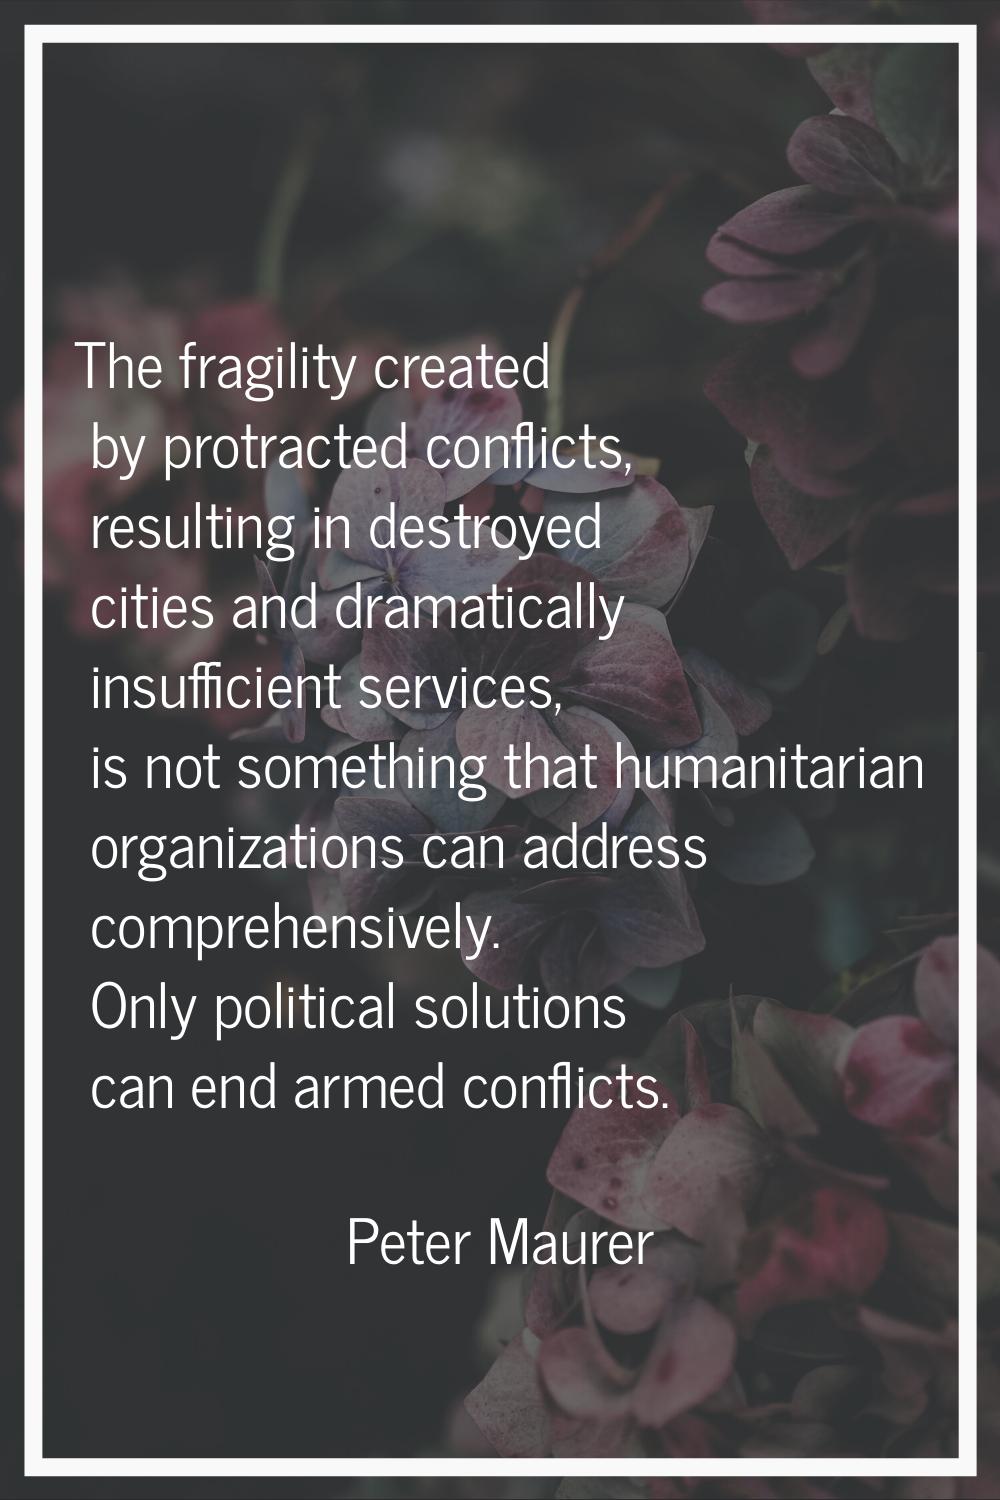 The fragility created by protracted conflicts, resulting in destroyed cities and dramatically insuf